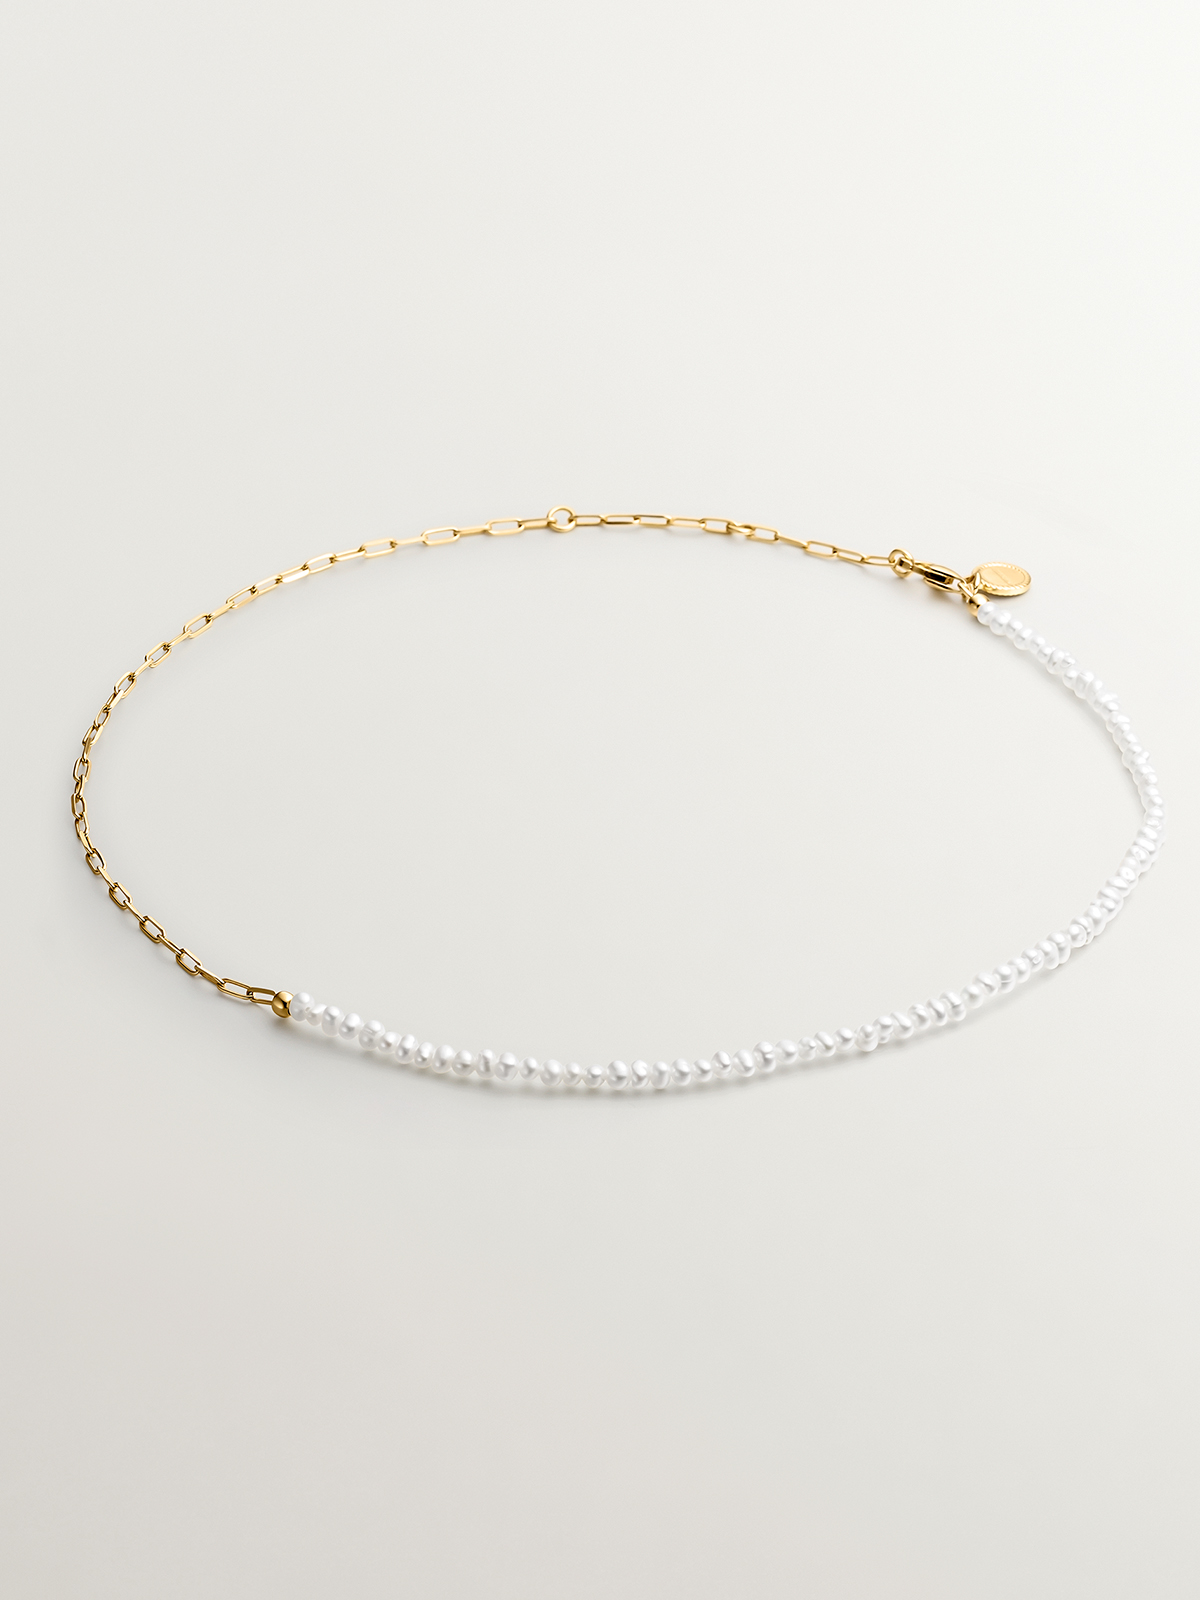 925 silver link necklace in 18k yellow gold with pearls